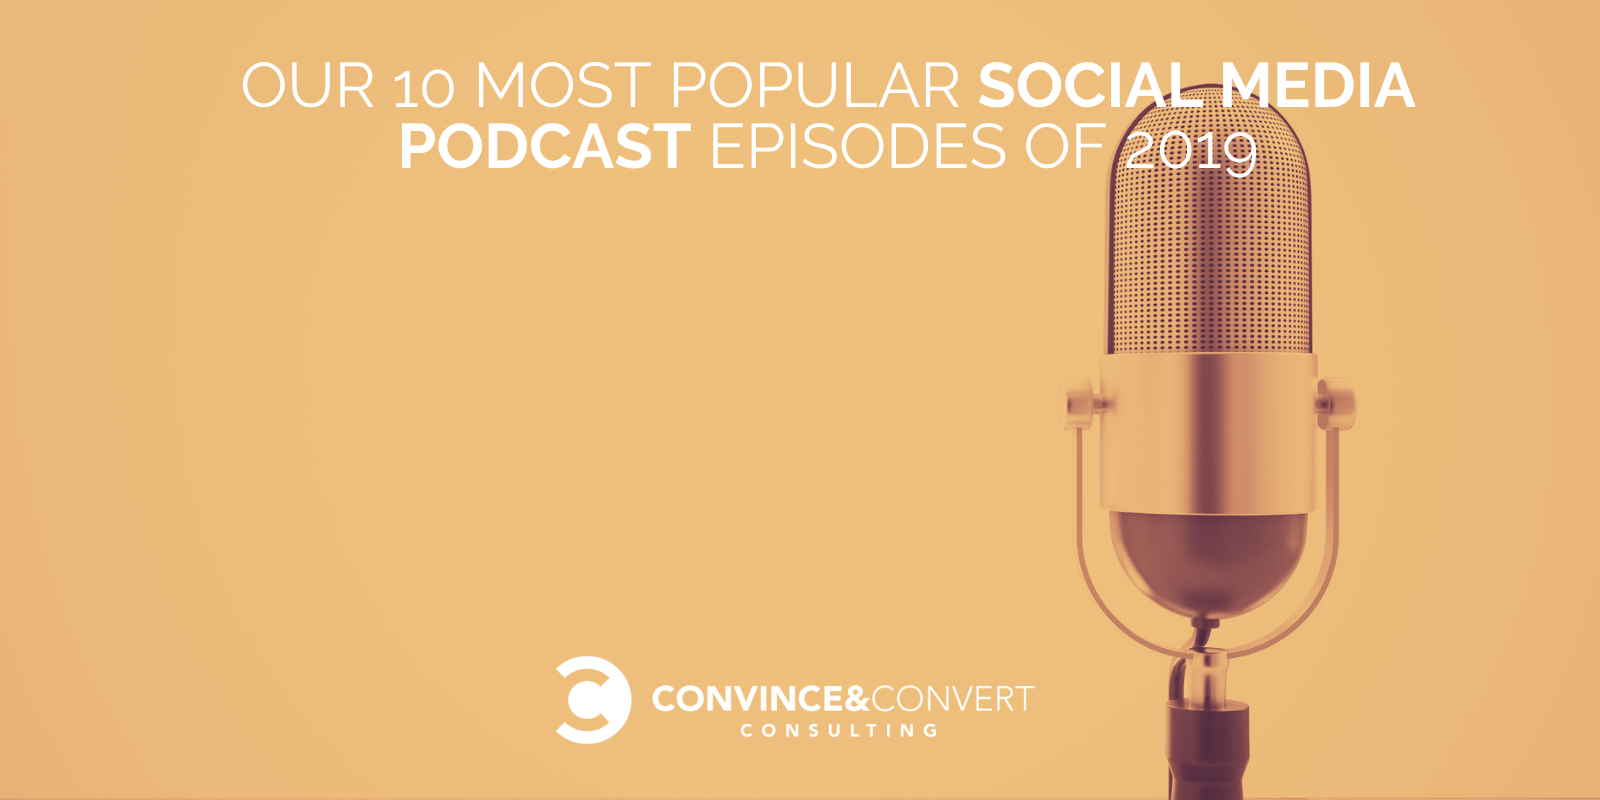 Our 10 Most Popular Social Media Podcast Episodes of 2019